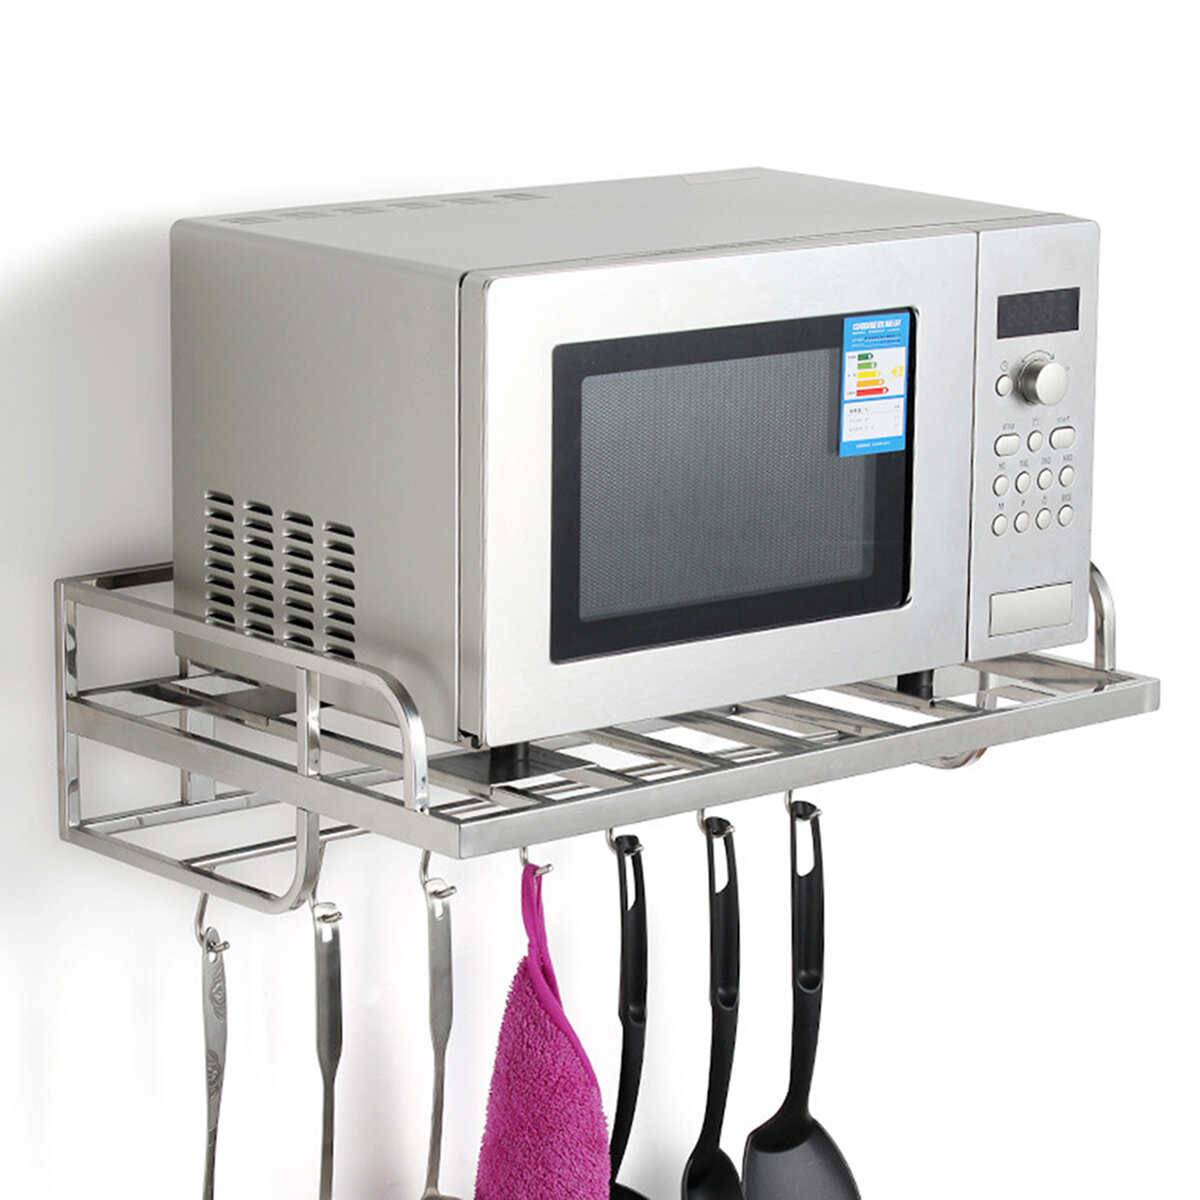 Image of 550*385*160mm Stainless Steel Microwave Oven Rack with Six Hooks Single-layer Wall-mounted Storage Shelf